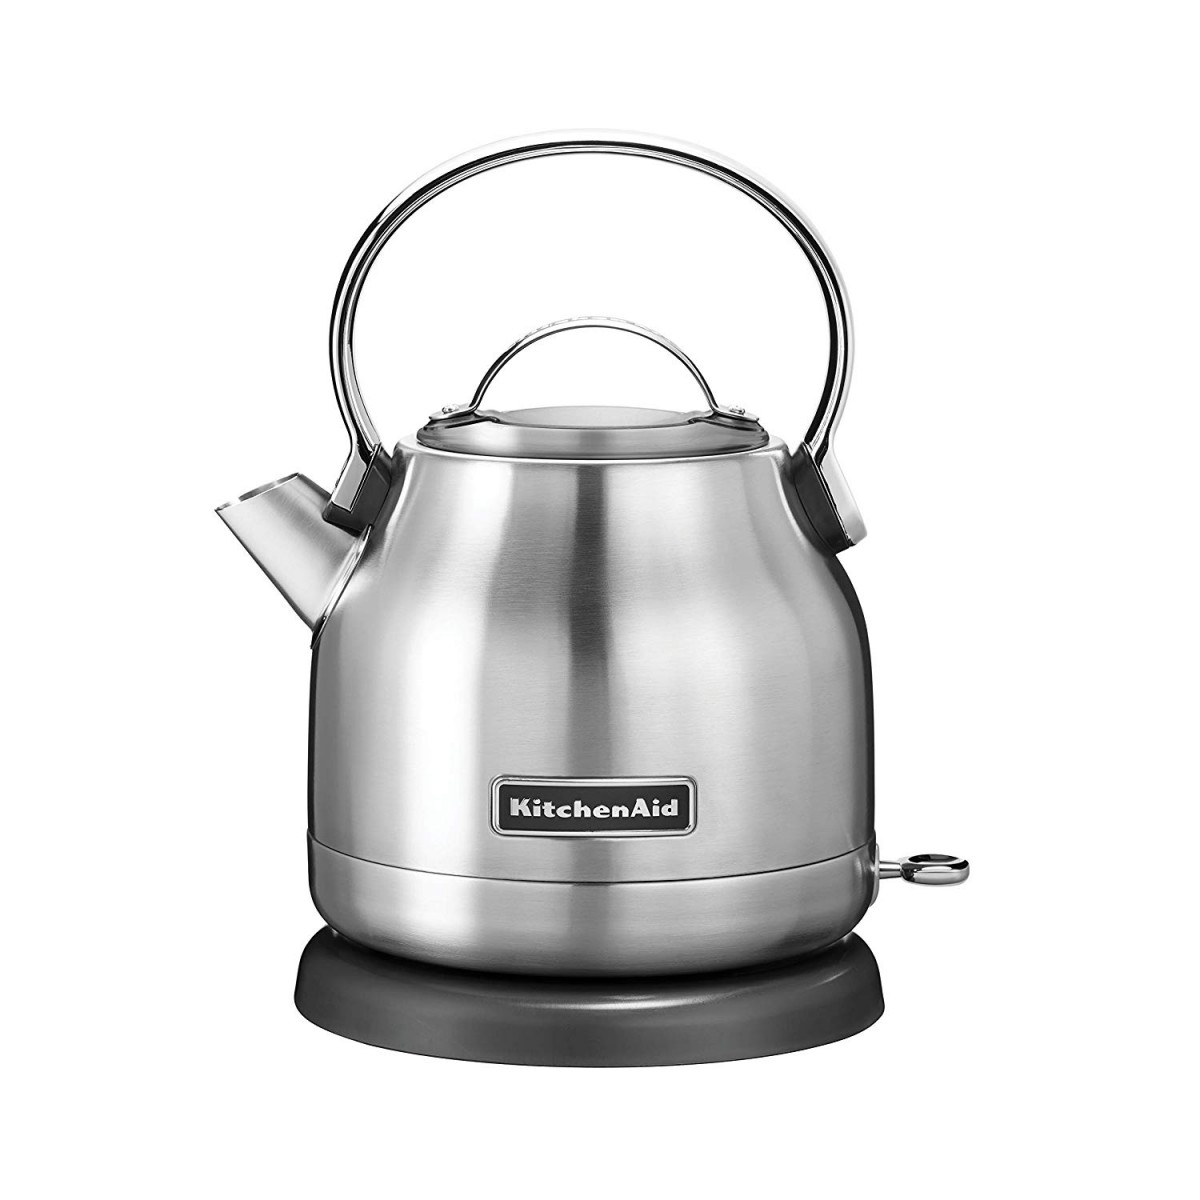 KITCHEN AID TEMPERATURE CONTROLLED KETTLE REVIEW 